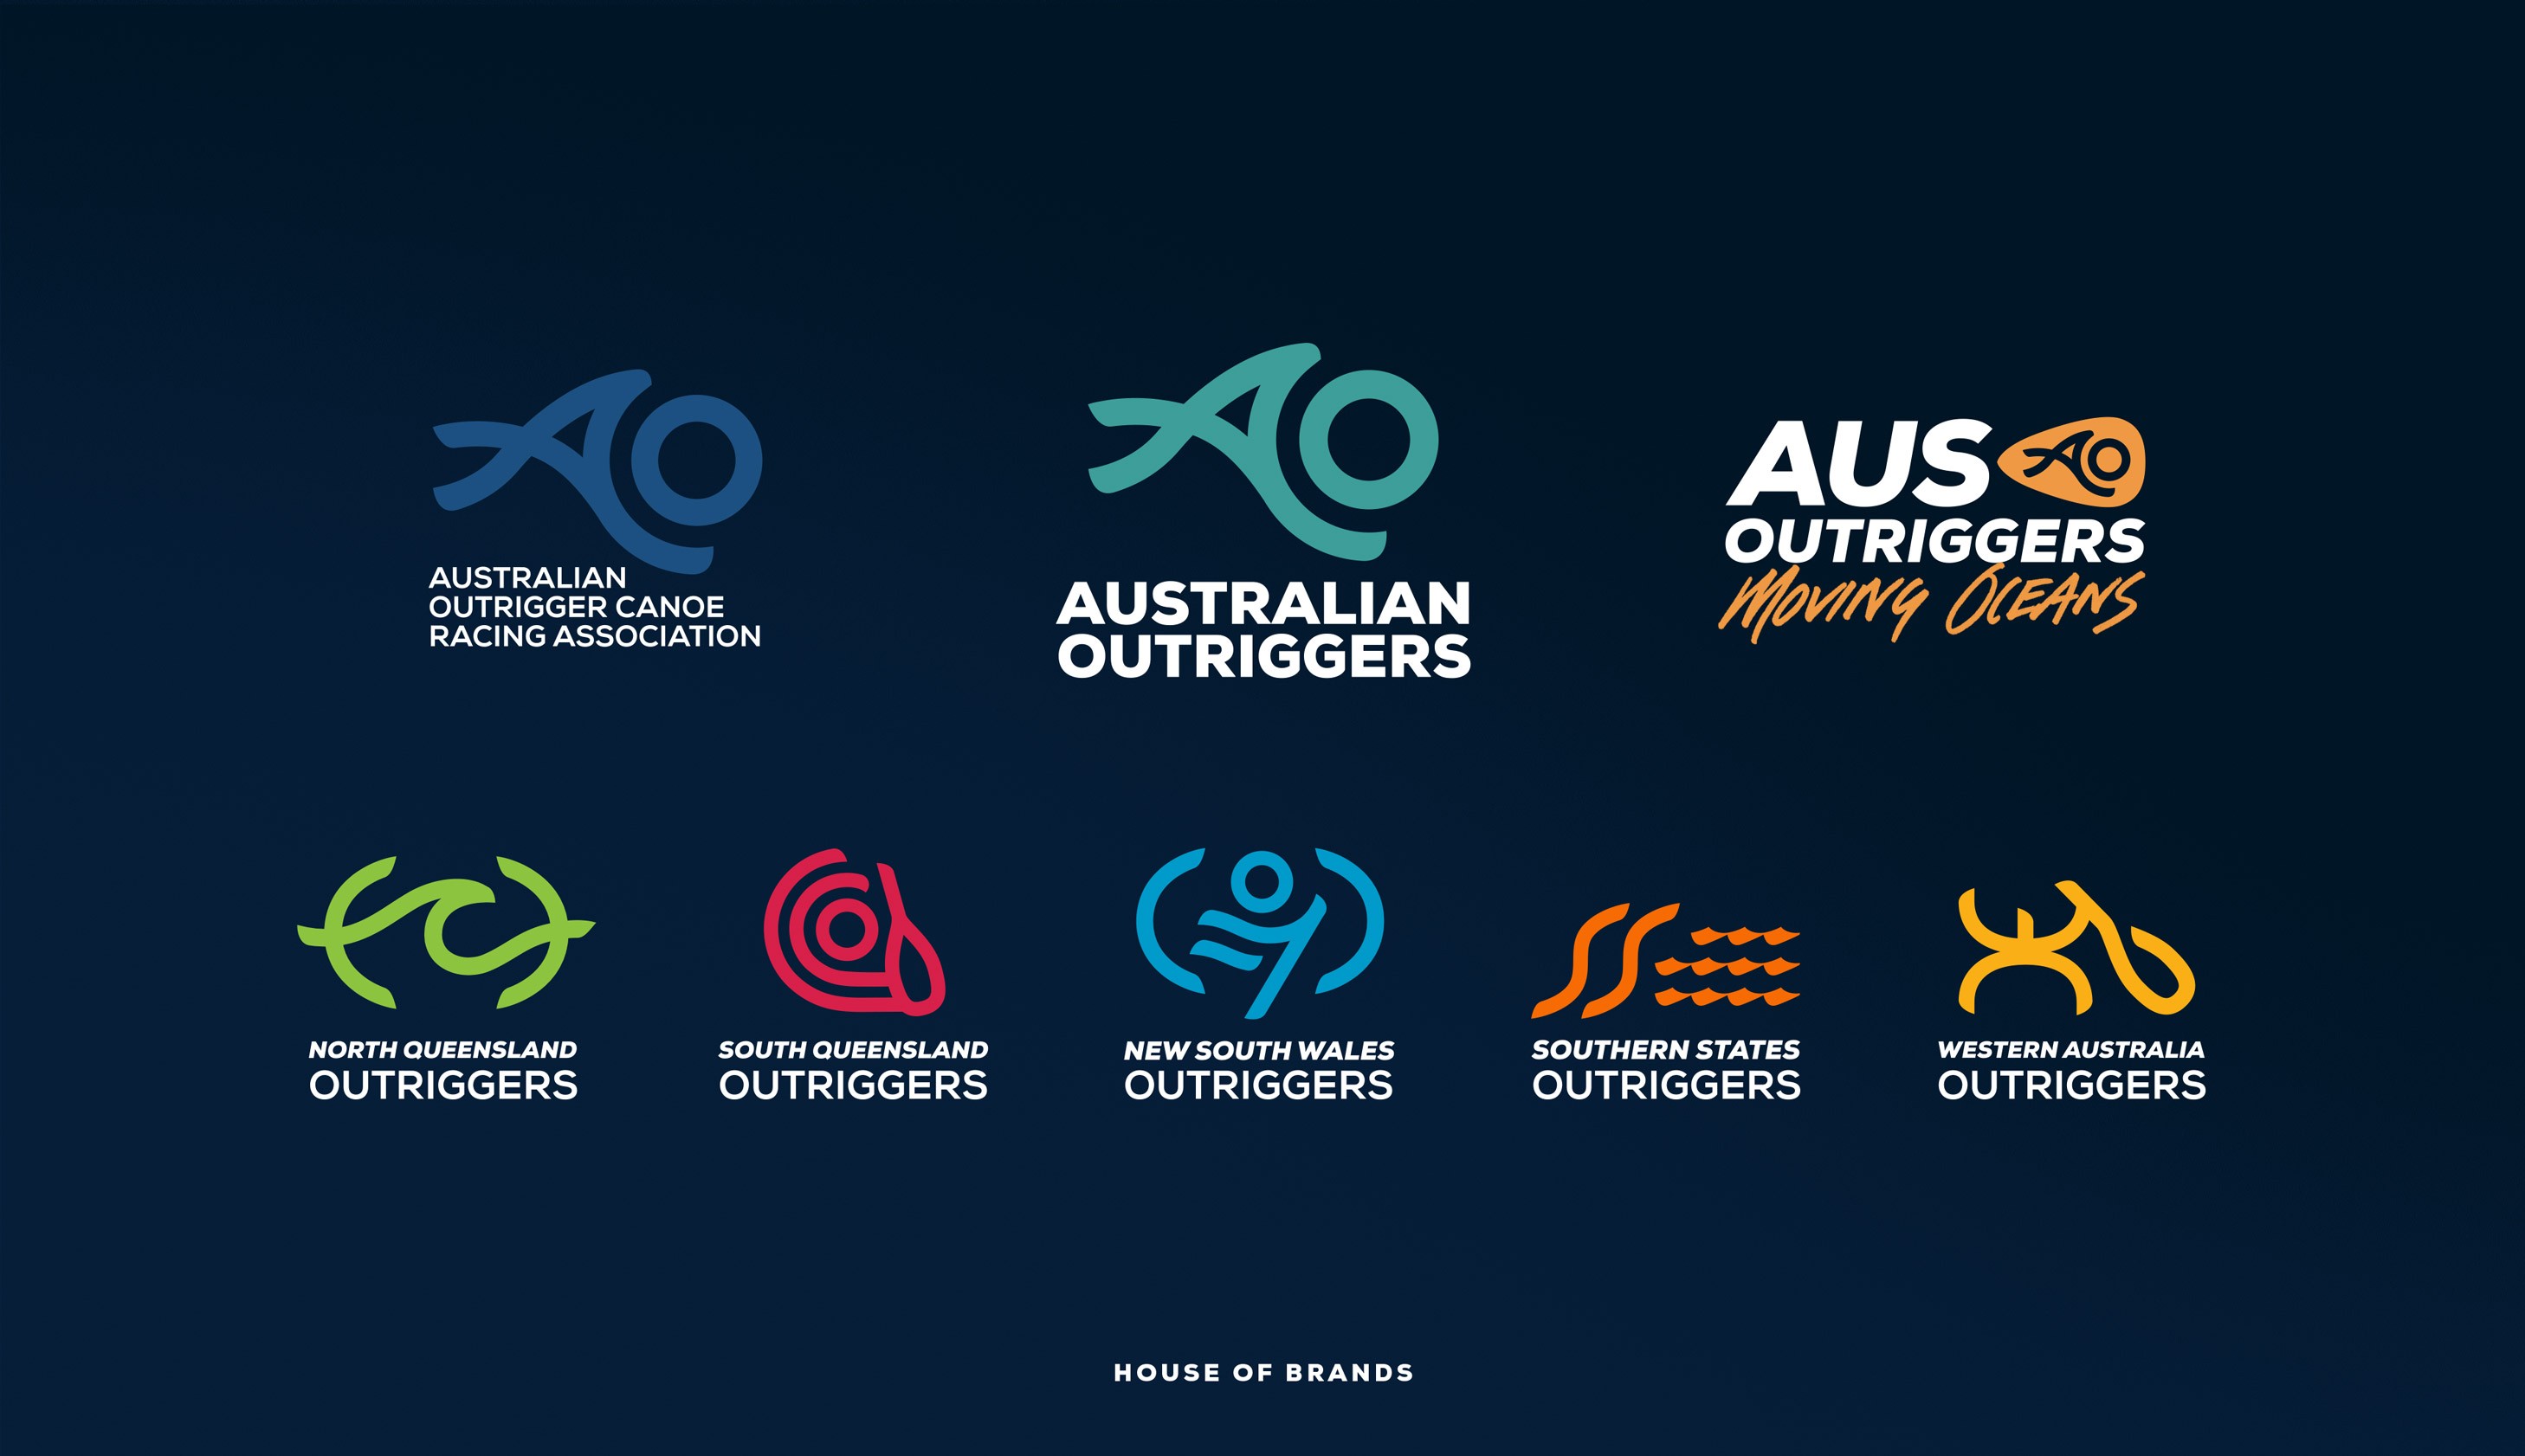 Australian Outriggers | House of Brands